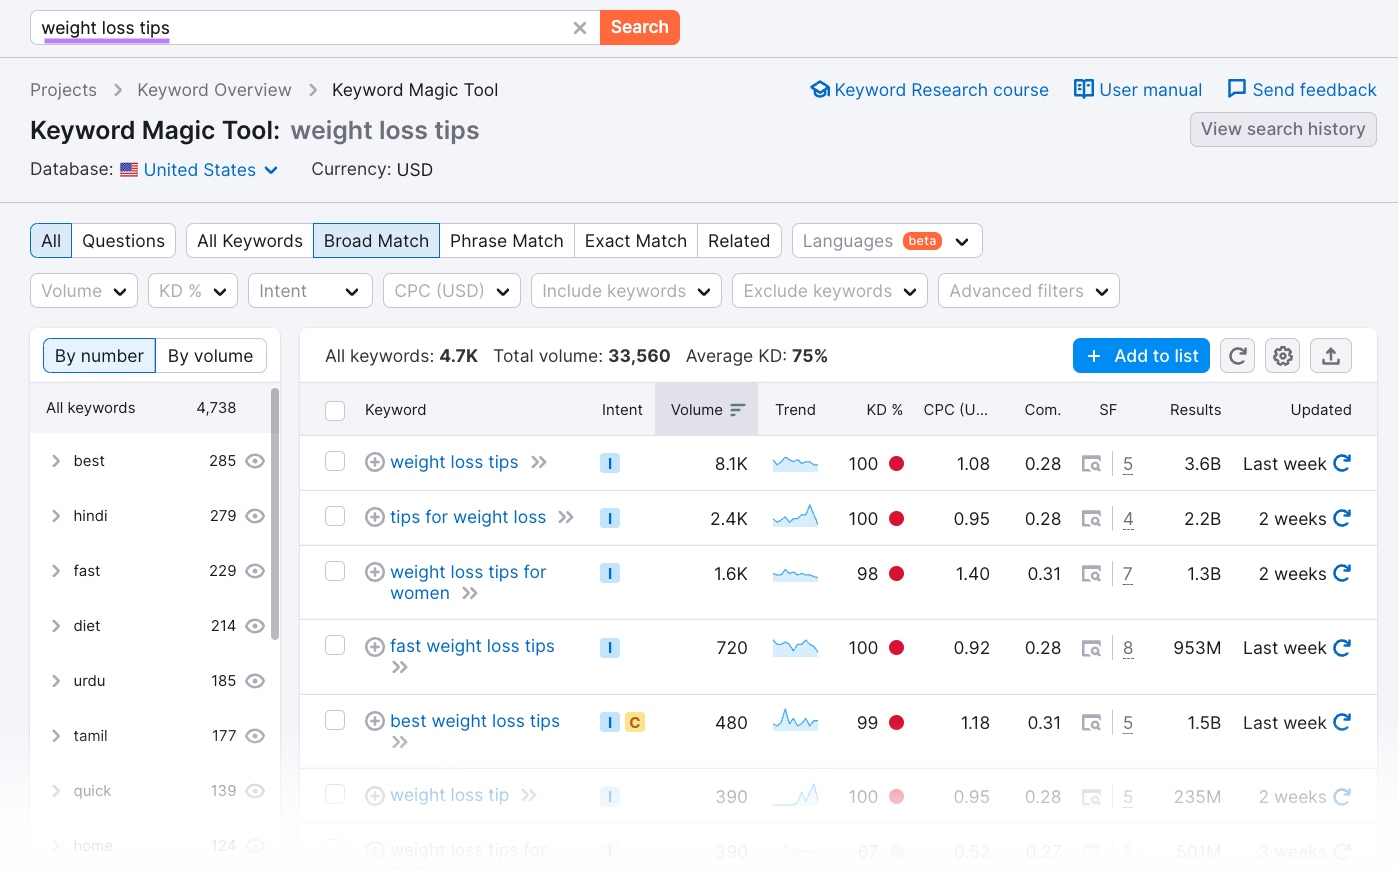 Keyword Magic Tool results for “weight loss tips"